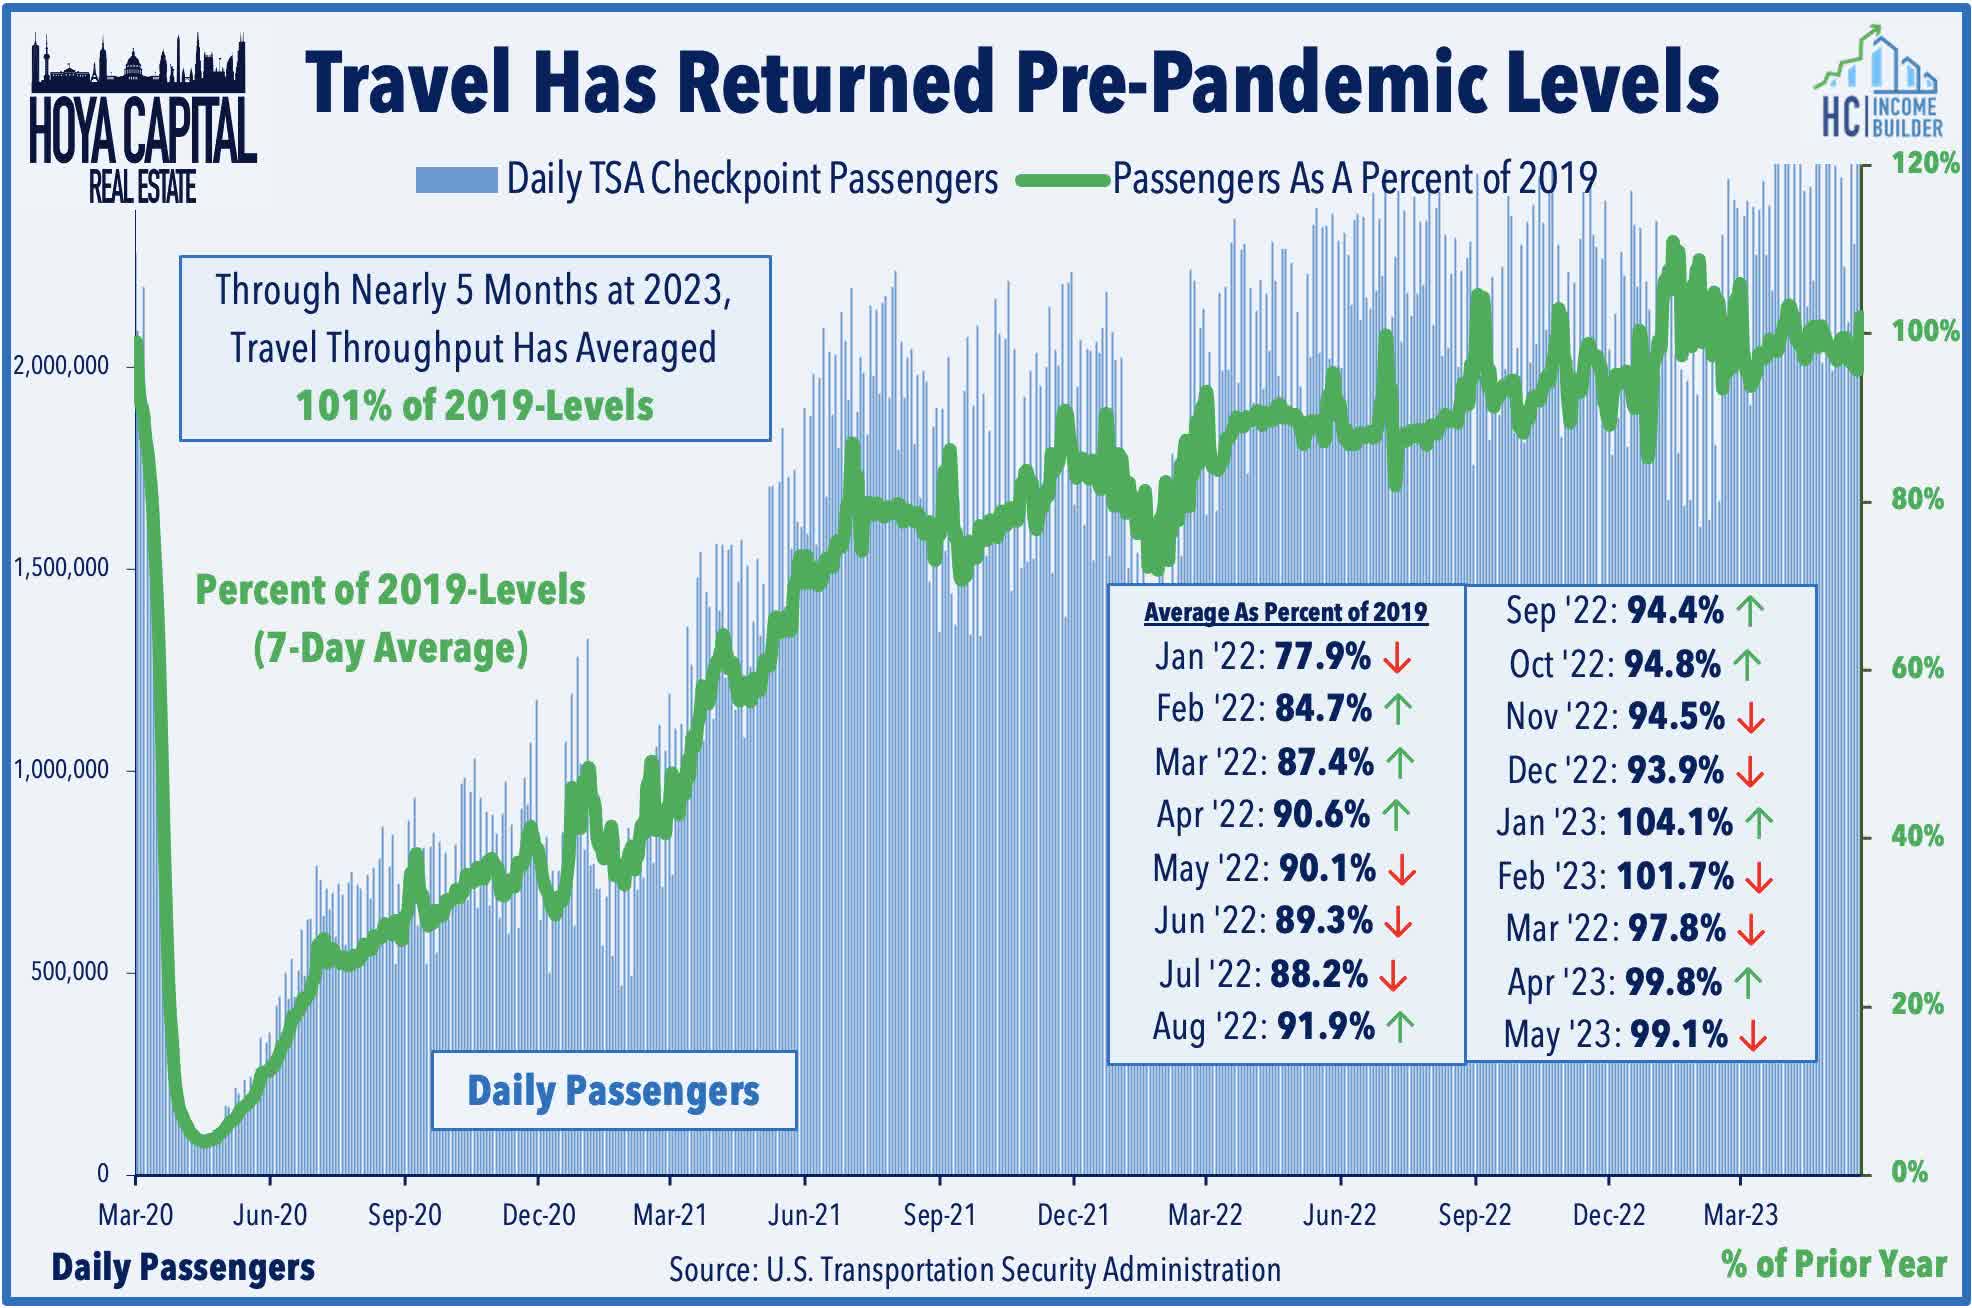 line and bar chart, showing TSA passenger counts and passengers as a percent of 2019 levels, both at 100% or higher